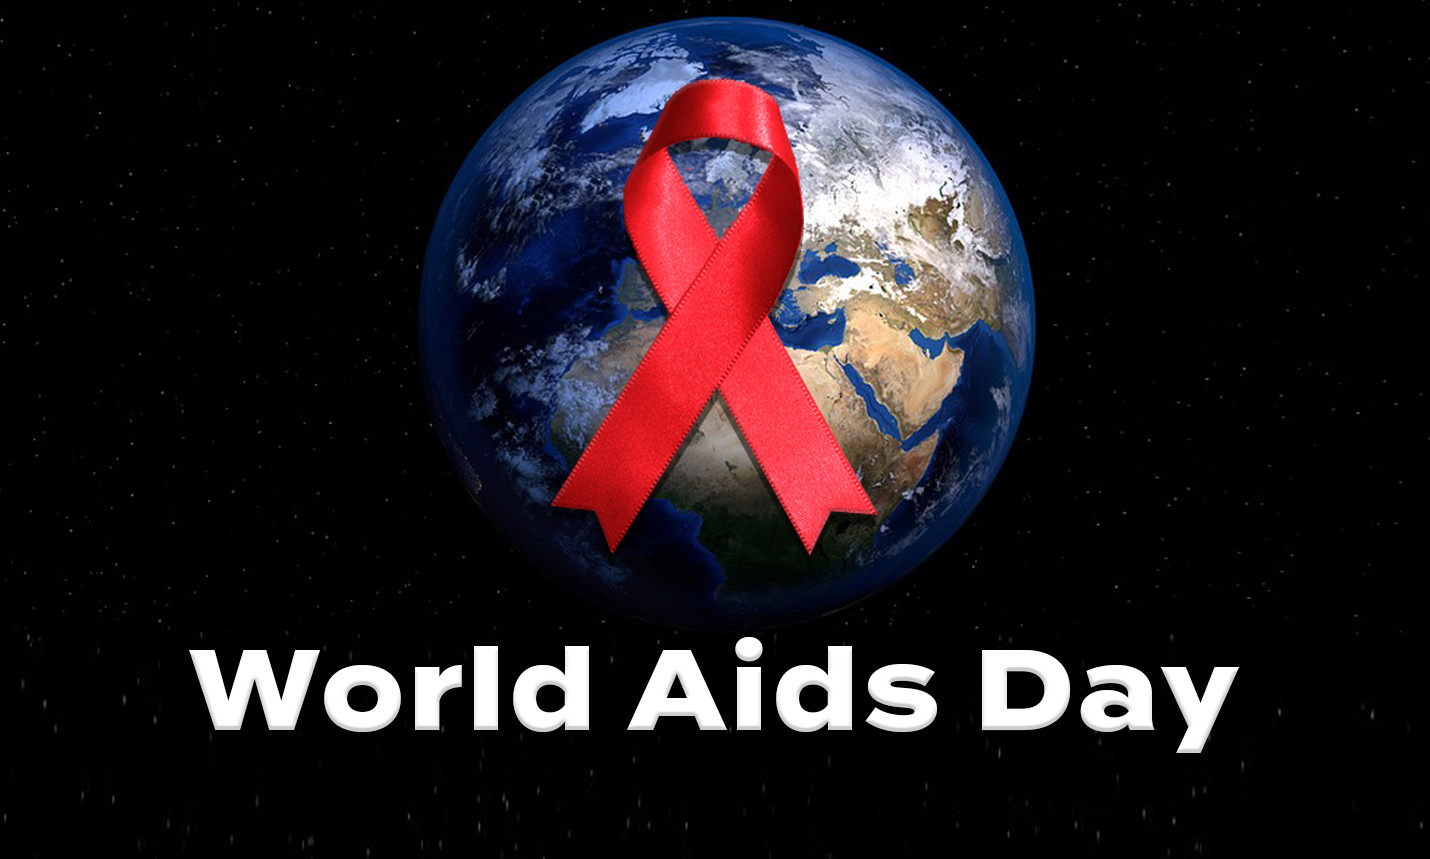 AIDS Awareness Day: Why AIDS Prevention Still Needs Your Help | HealthSoul